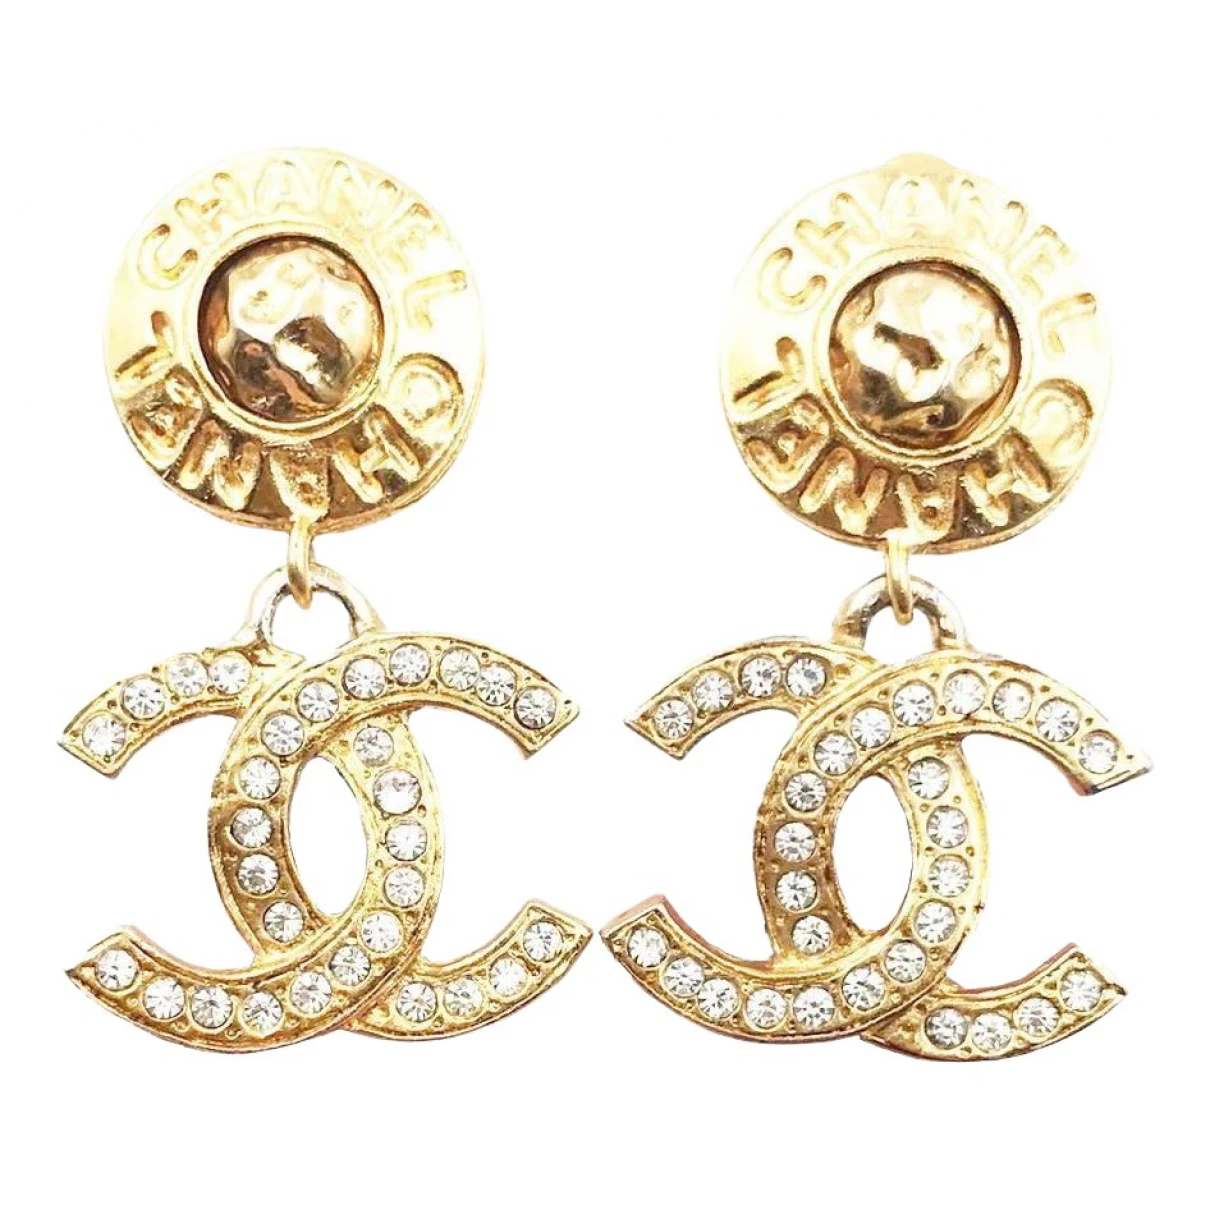 jewellery Chanel earrings CC for Female Gold plated. Used condition